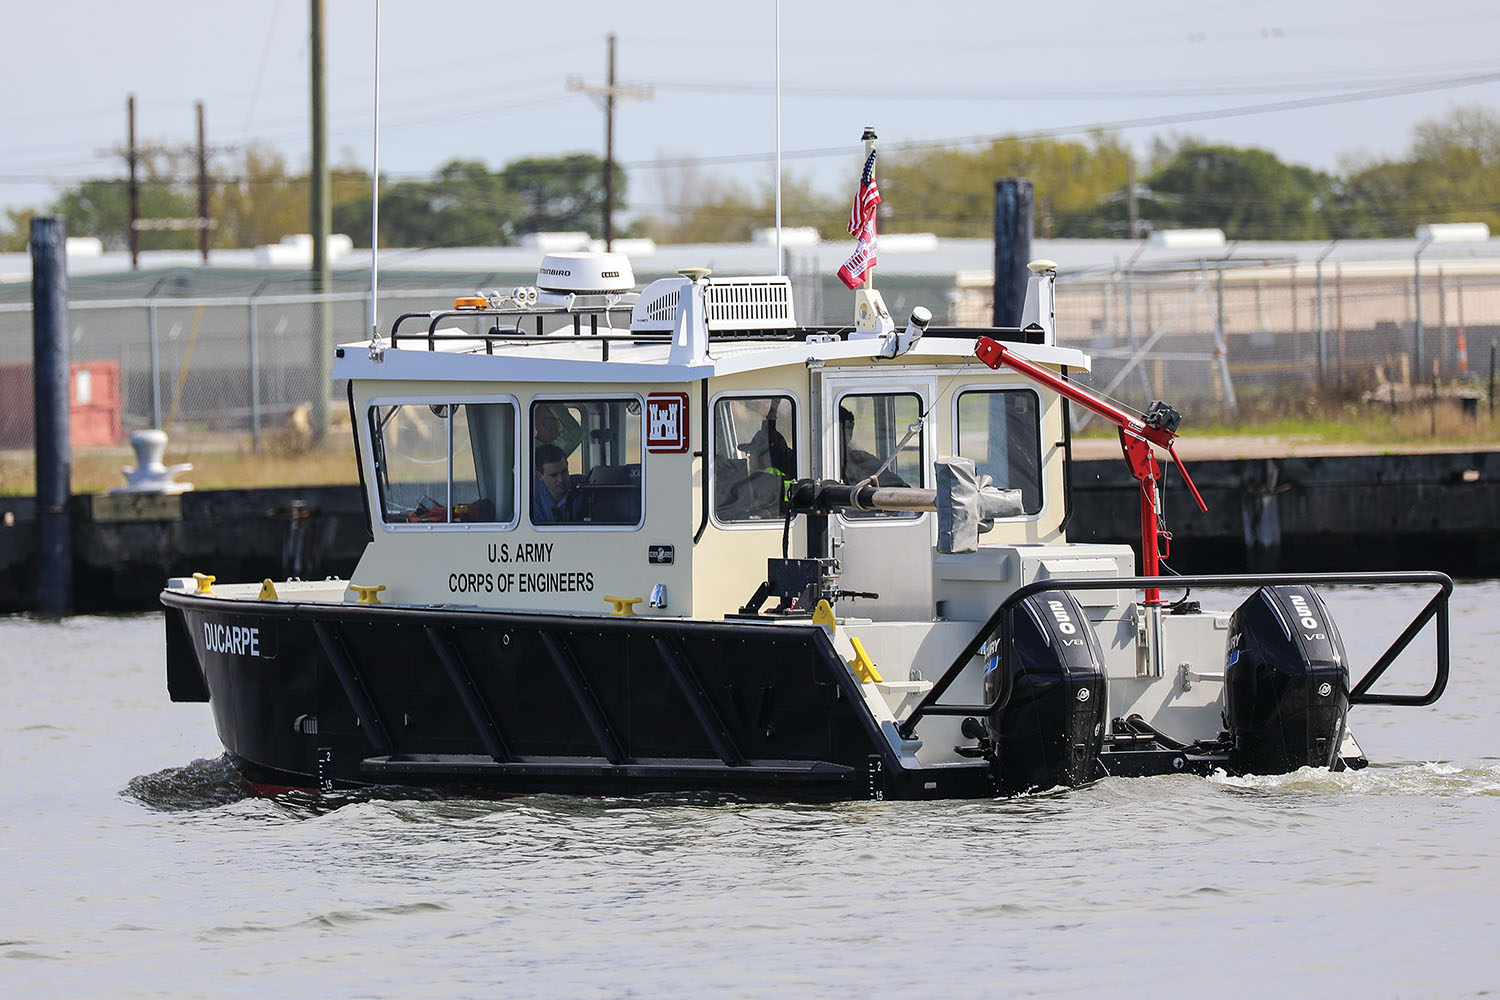 The mv. Ducarpe sets sail after a christening ceremony held at the Seabrook Harbor & Marine March 7 in New Orleans, La. This hydrographic survey boat is the newest among the fleet of vessels that sails the waters of South Louisiana for the New Orleans Engineer District. (U.S. Army photo by Sye Ellis)